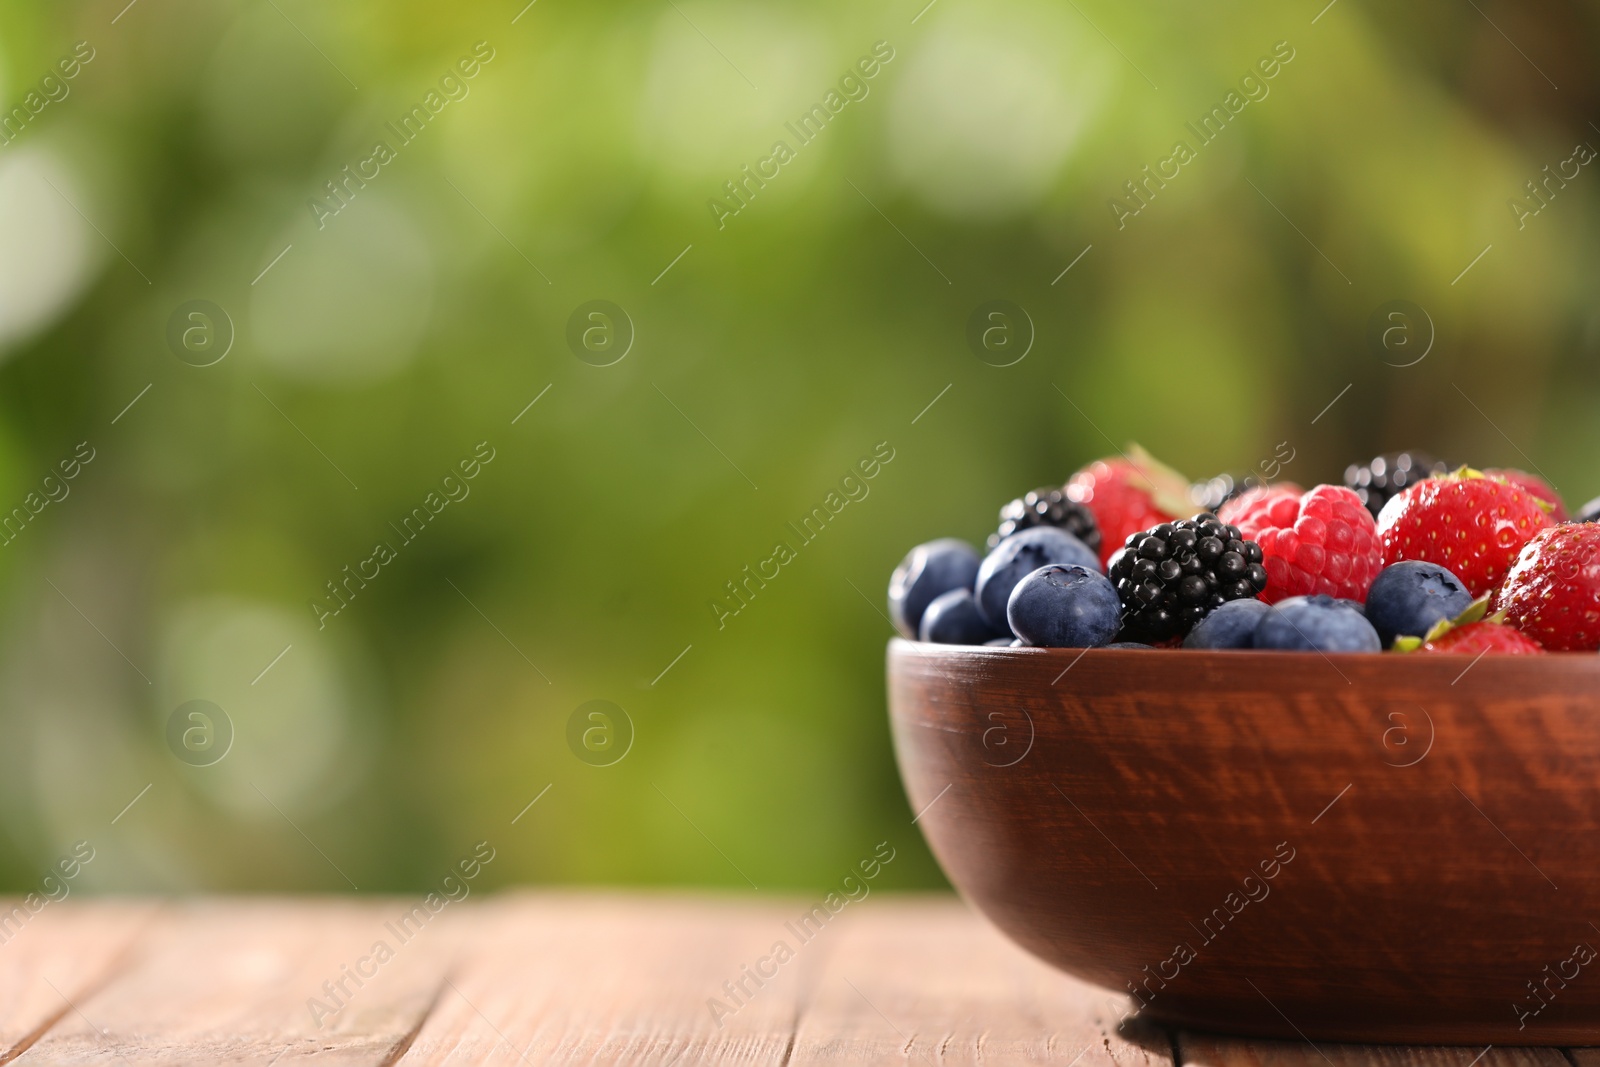 Photo of Bowl with different fresh ripe berries on wooden table outdoors, space for text